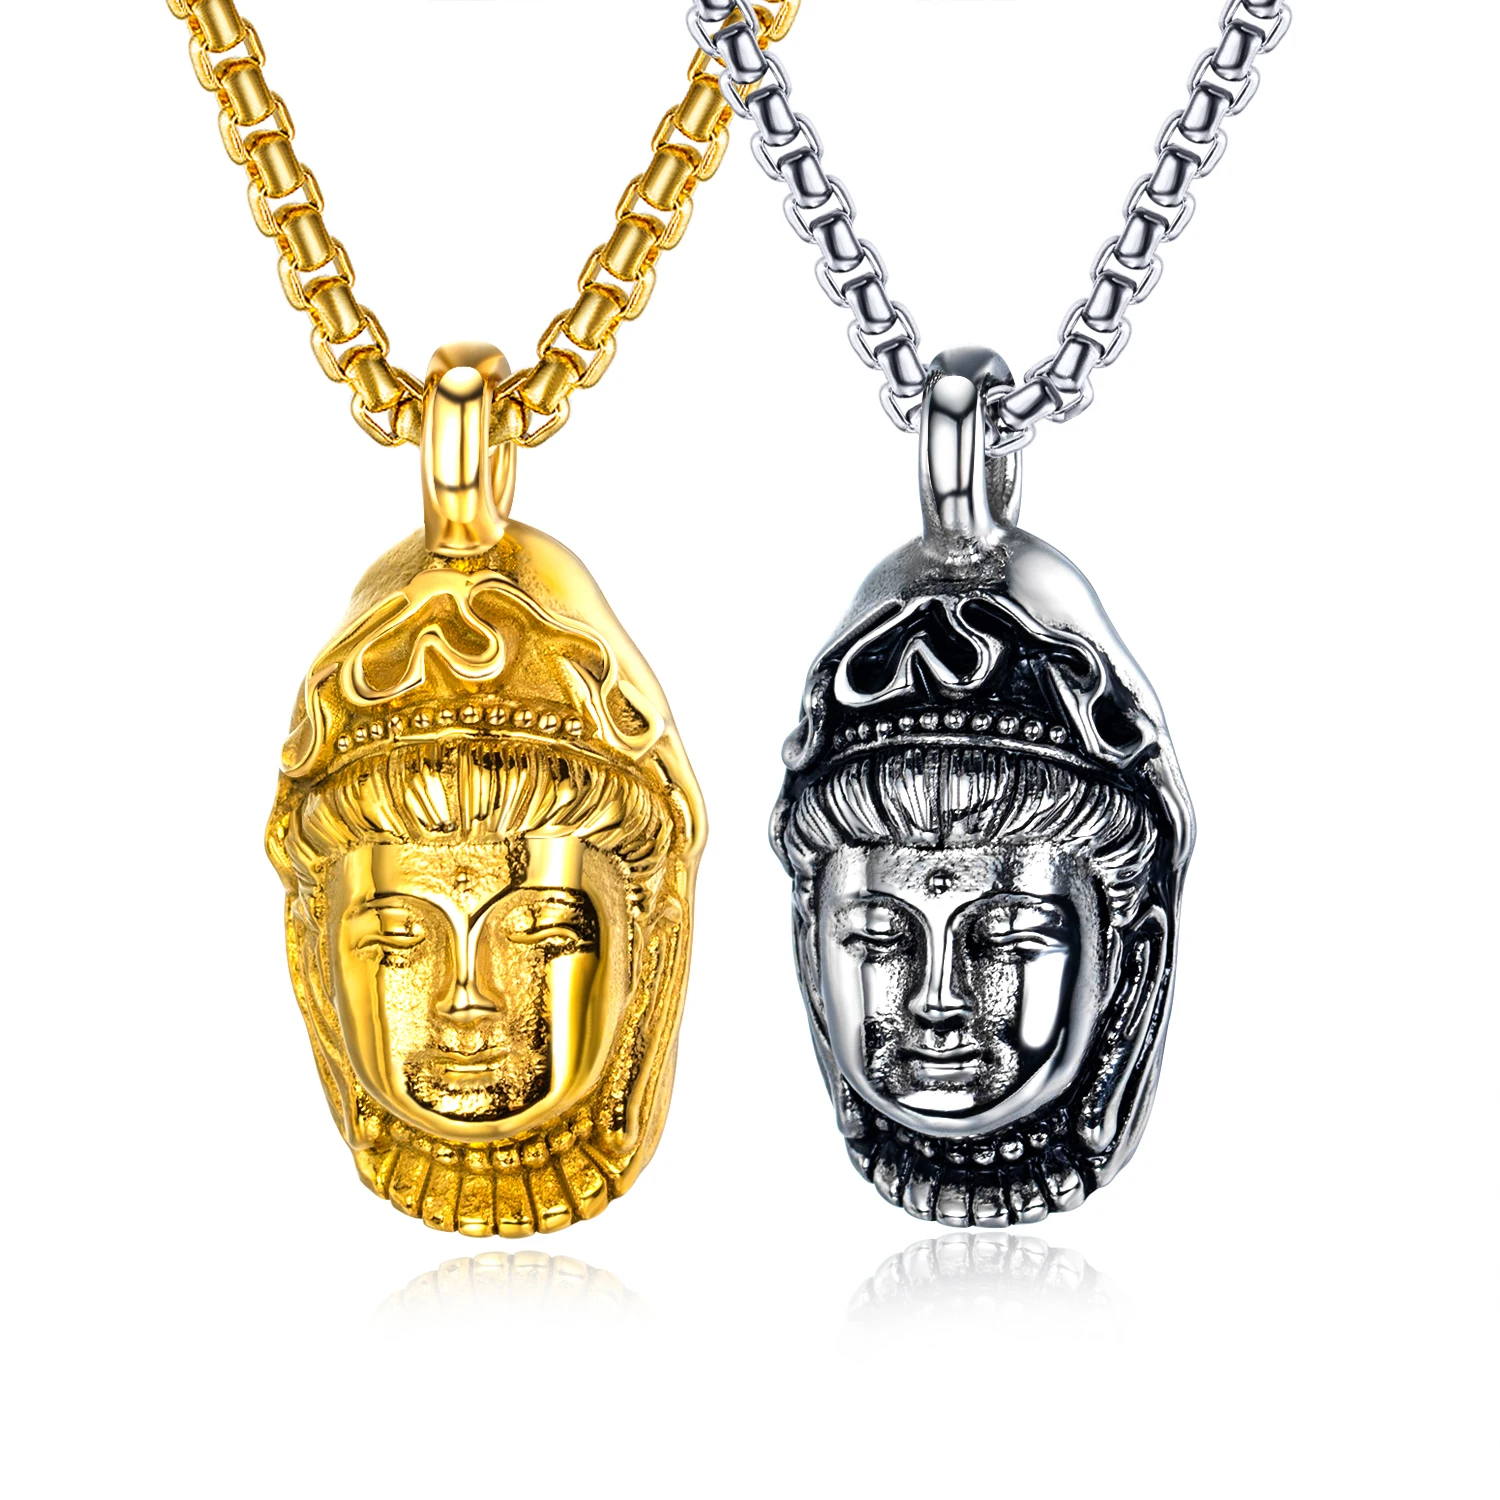 

Hiphop Buddha Pendant For Men Retro Titanium Steel Necklaces Jewelry 2021 New Buddhism Religious Cool Buddha Charm Pendant, Silver, gold